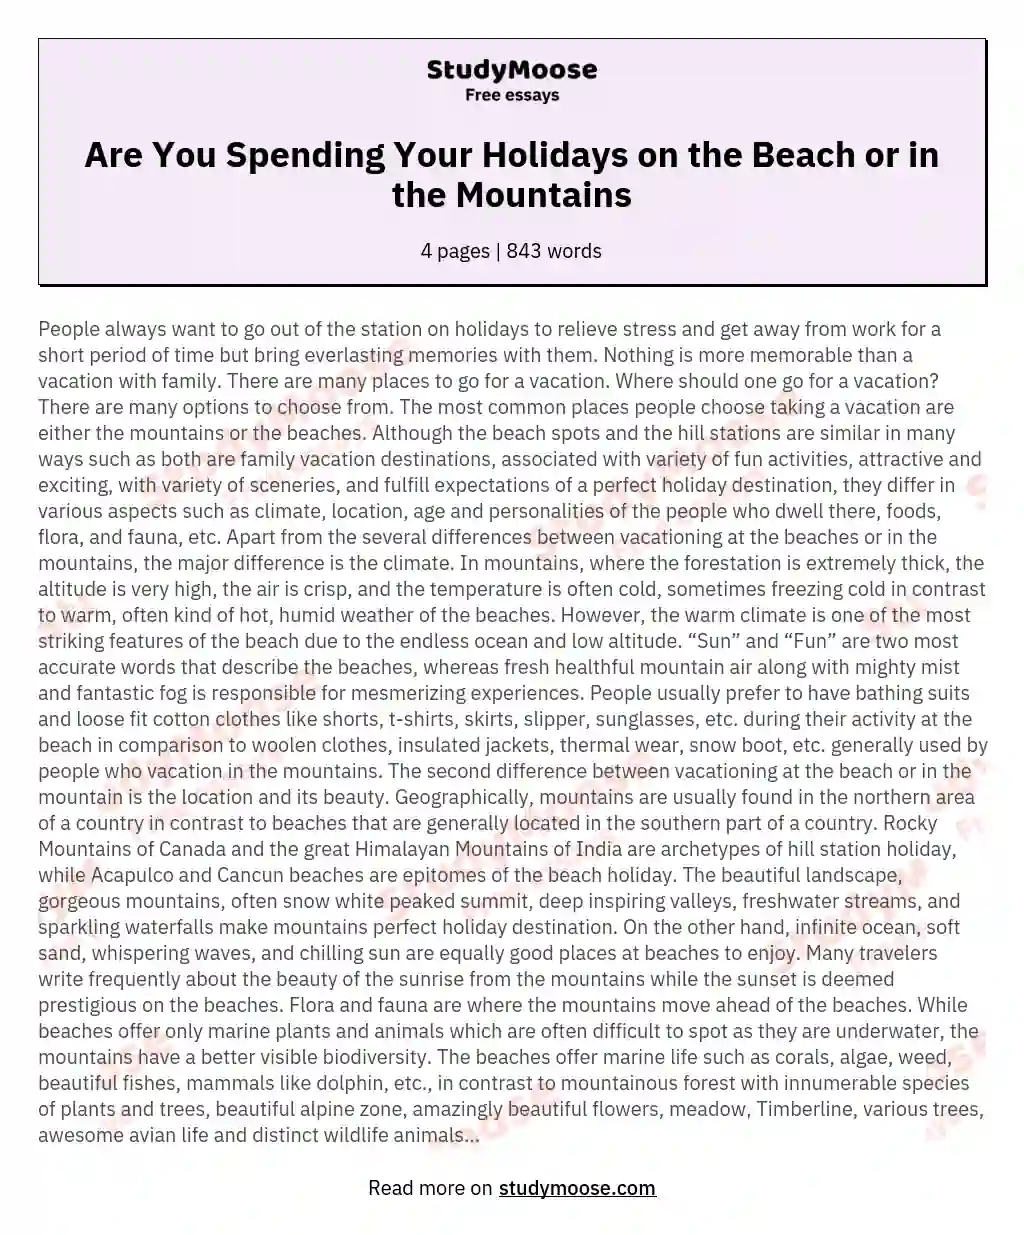 Are You Spending Your Holidays on the Beach or in the Mountains essay